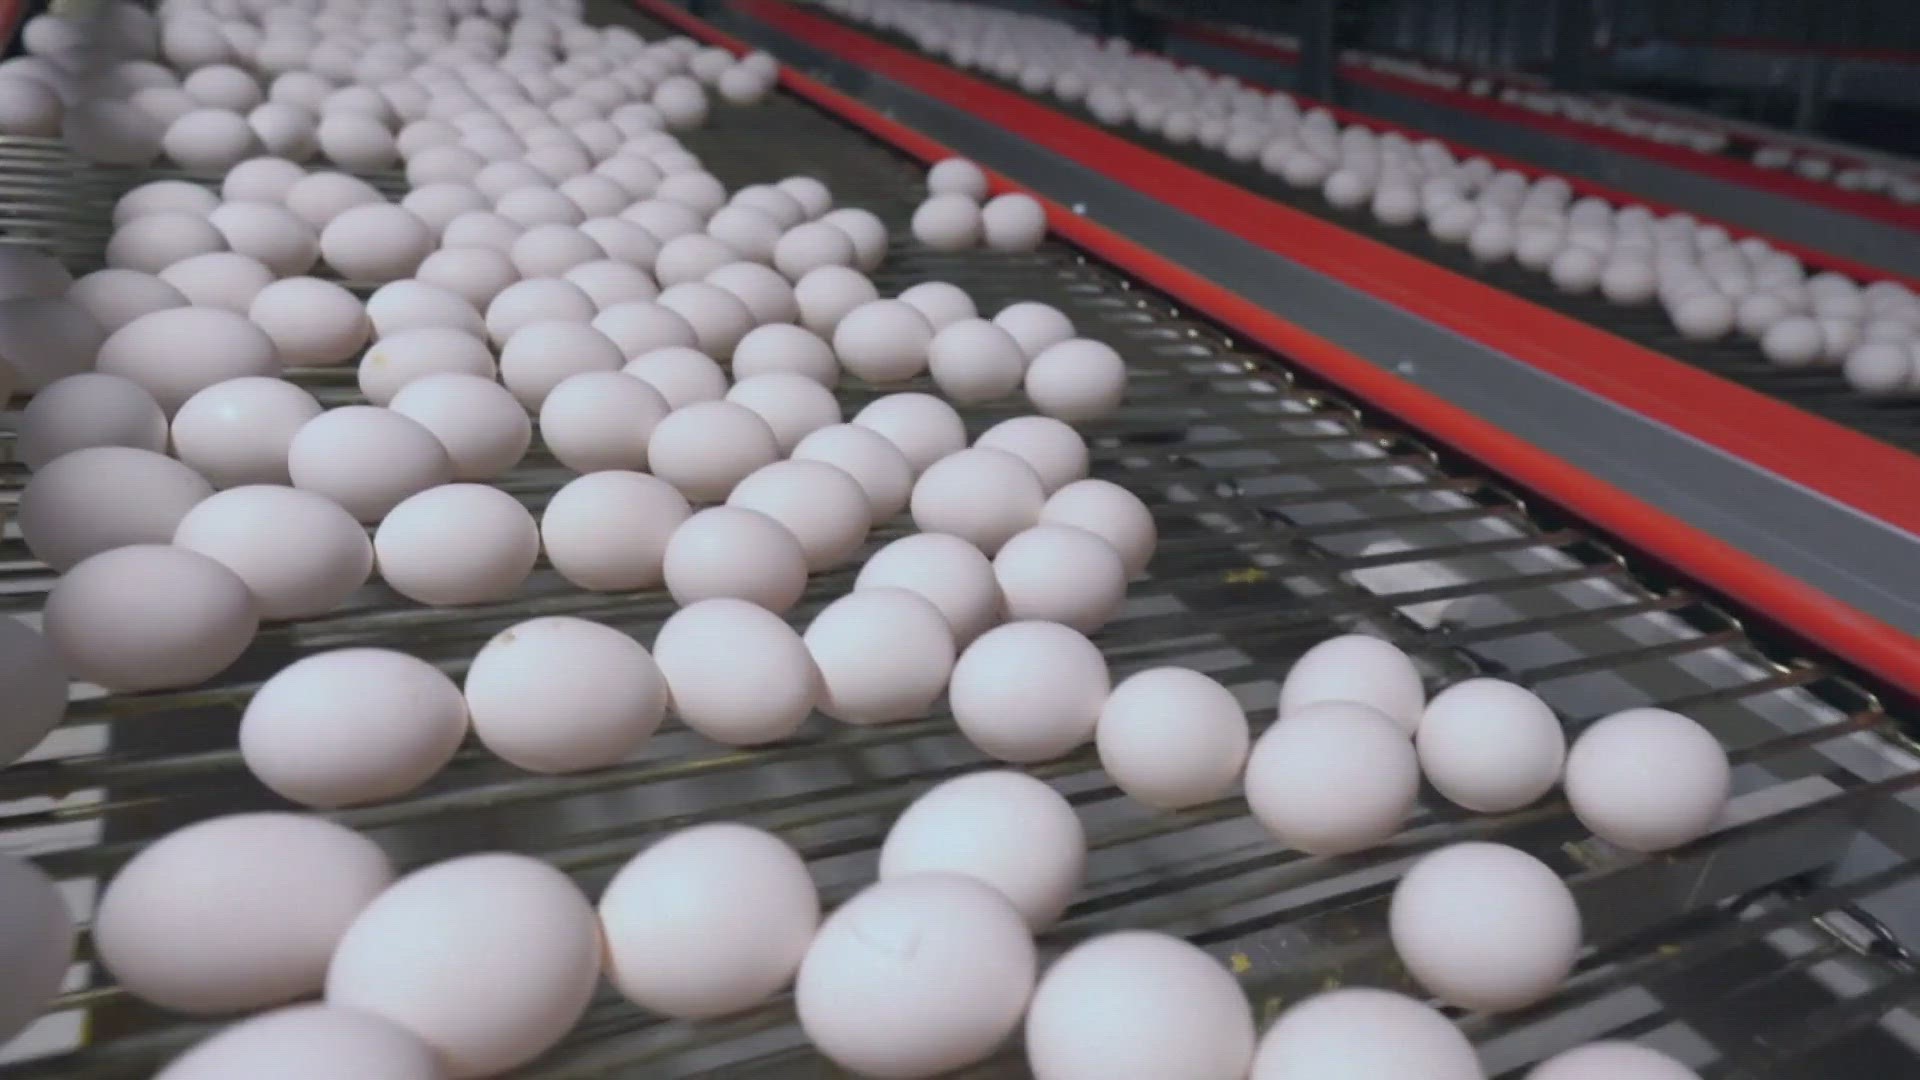 Egg industry officials and farmers say egg supplies have bounced back and egg-laying flocks have been rebuilt.